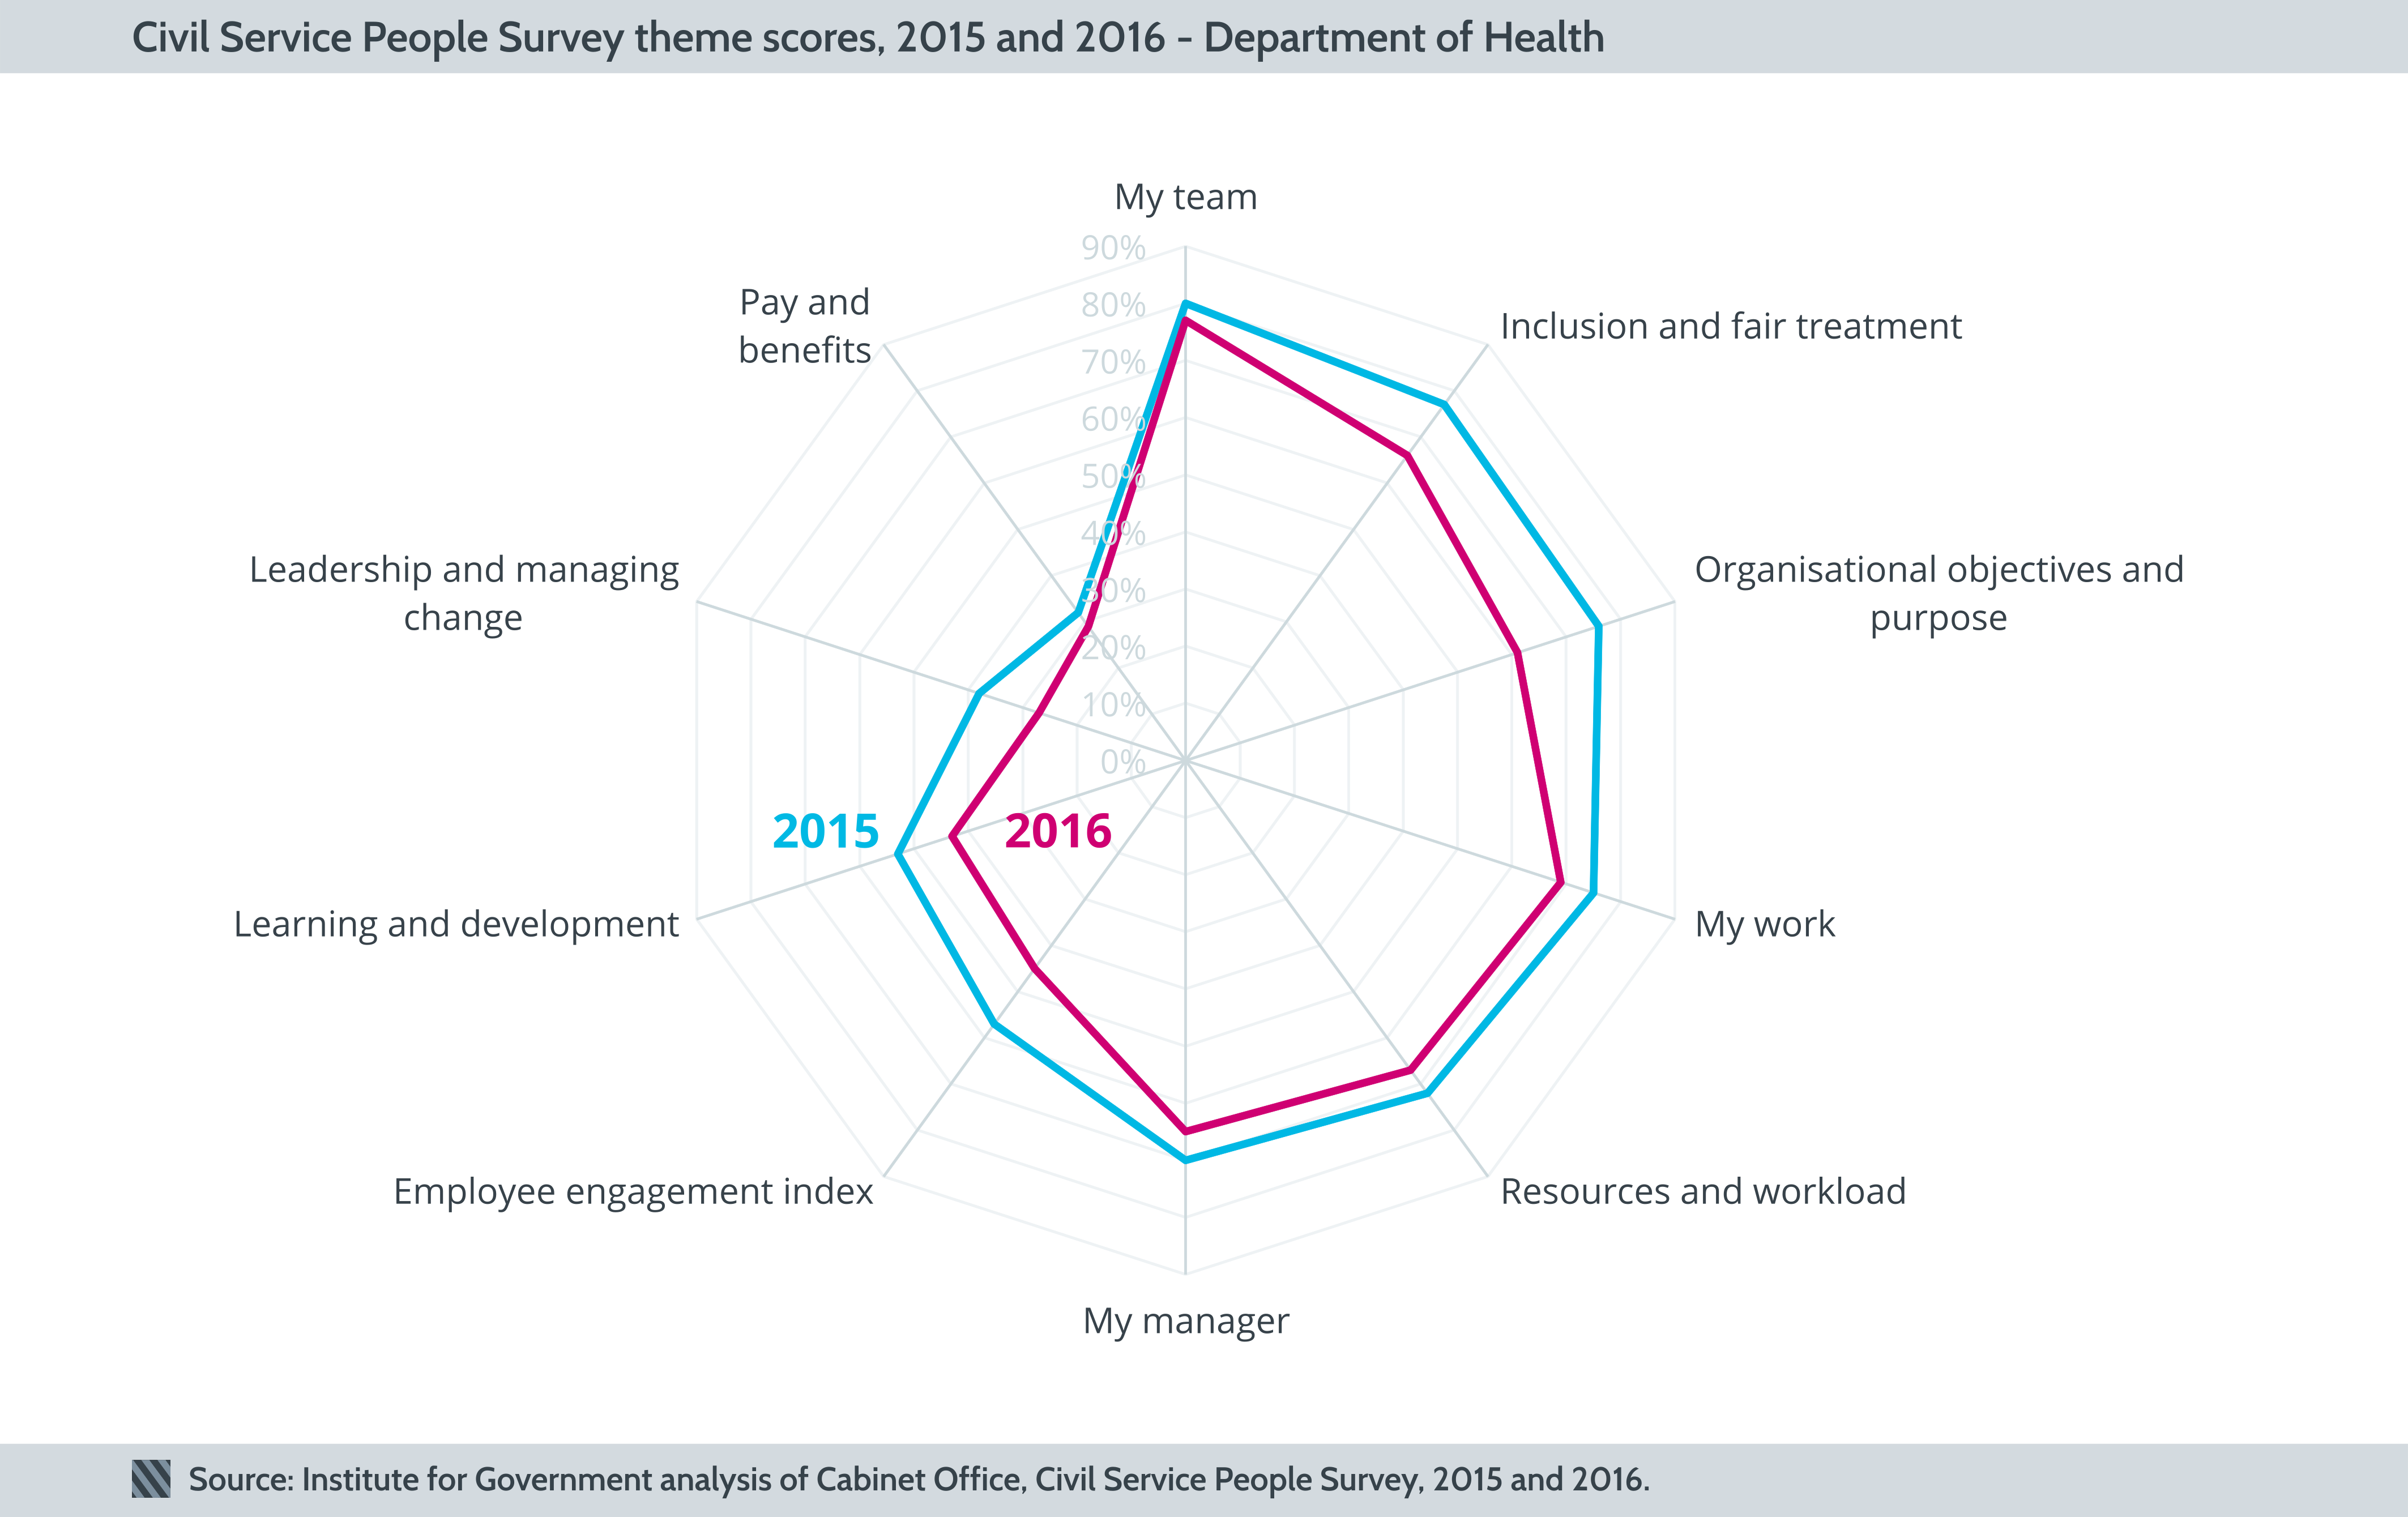 Department of Health engagement and theme scores, 2015 and 2016